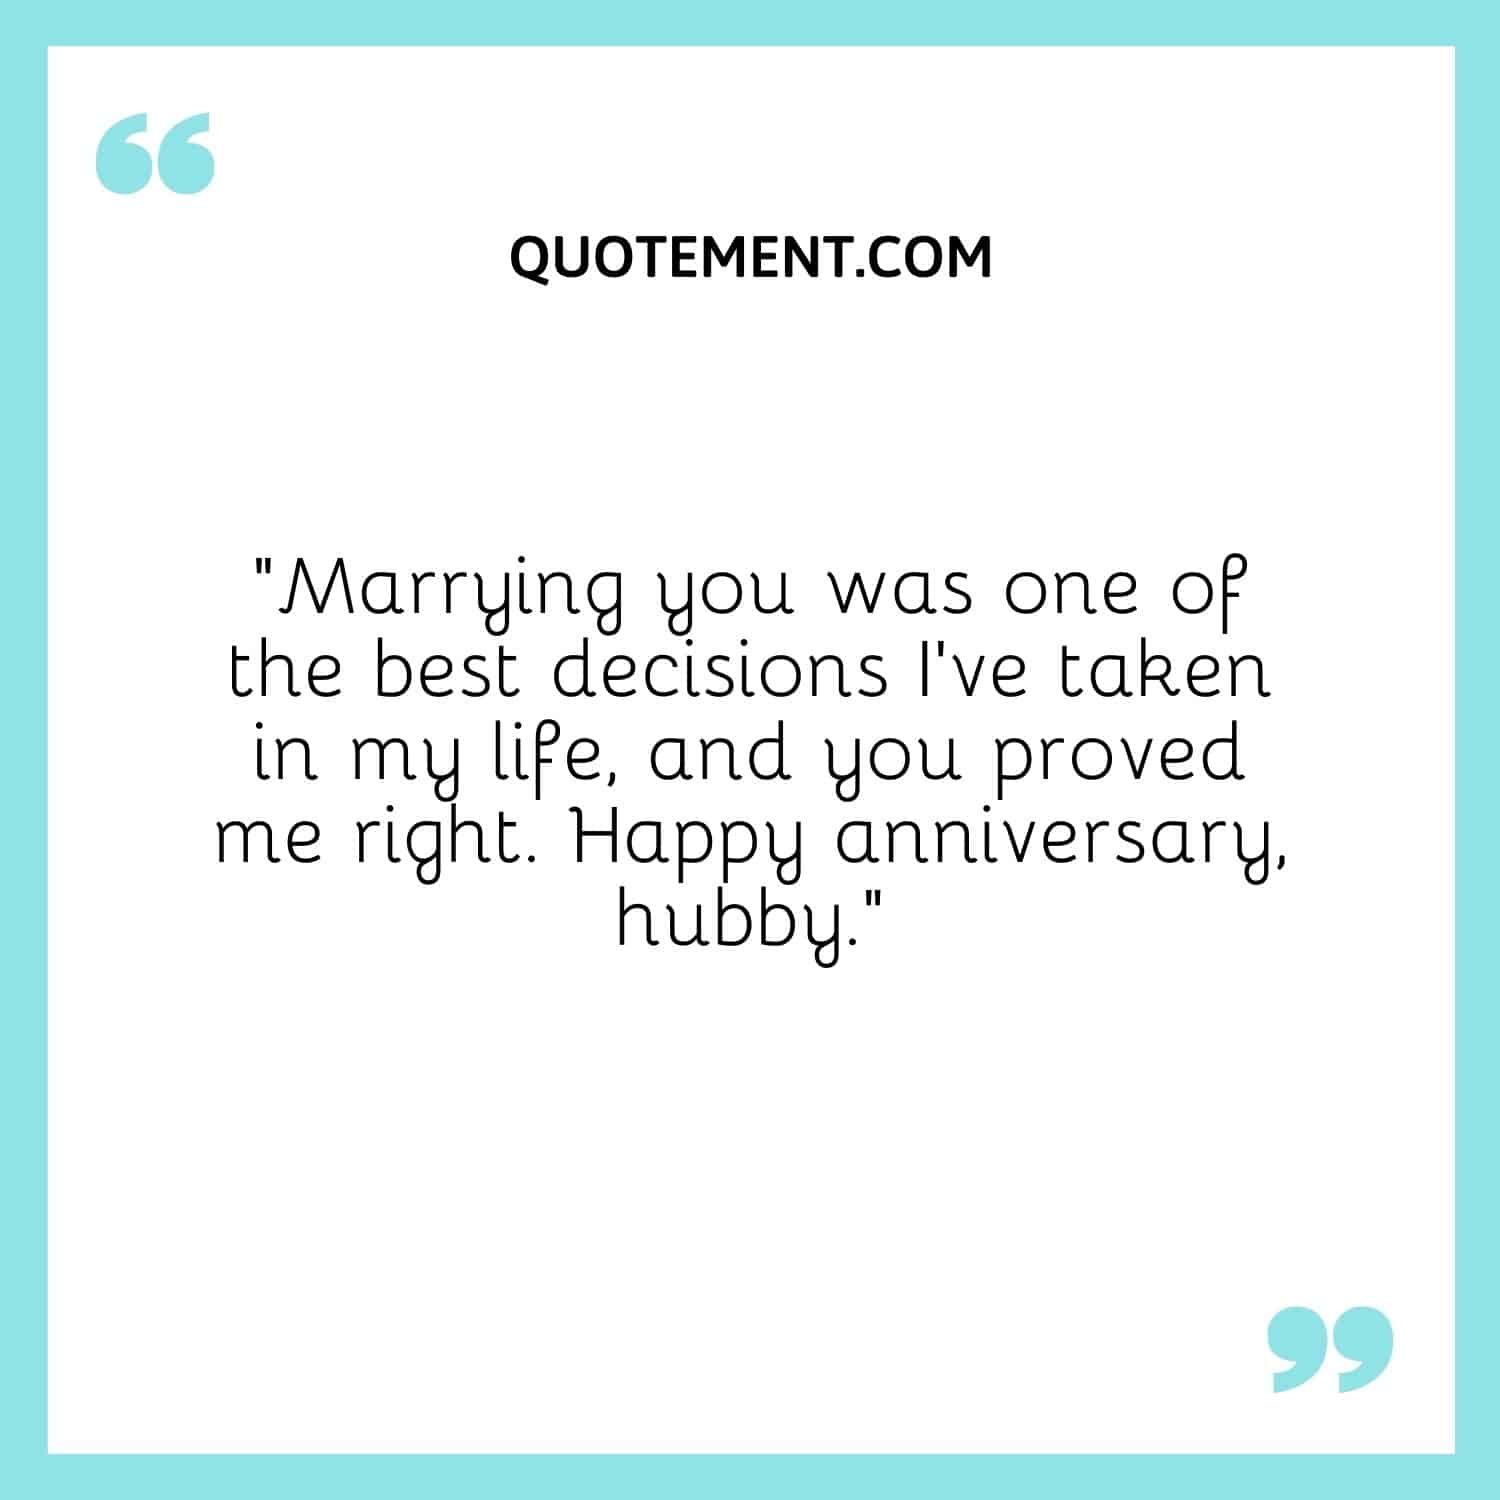 “Marrying you was one of the best decisions I’ve taken in my life, and you proved me right. Happy anniversary, hubby.”